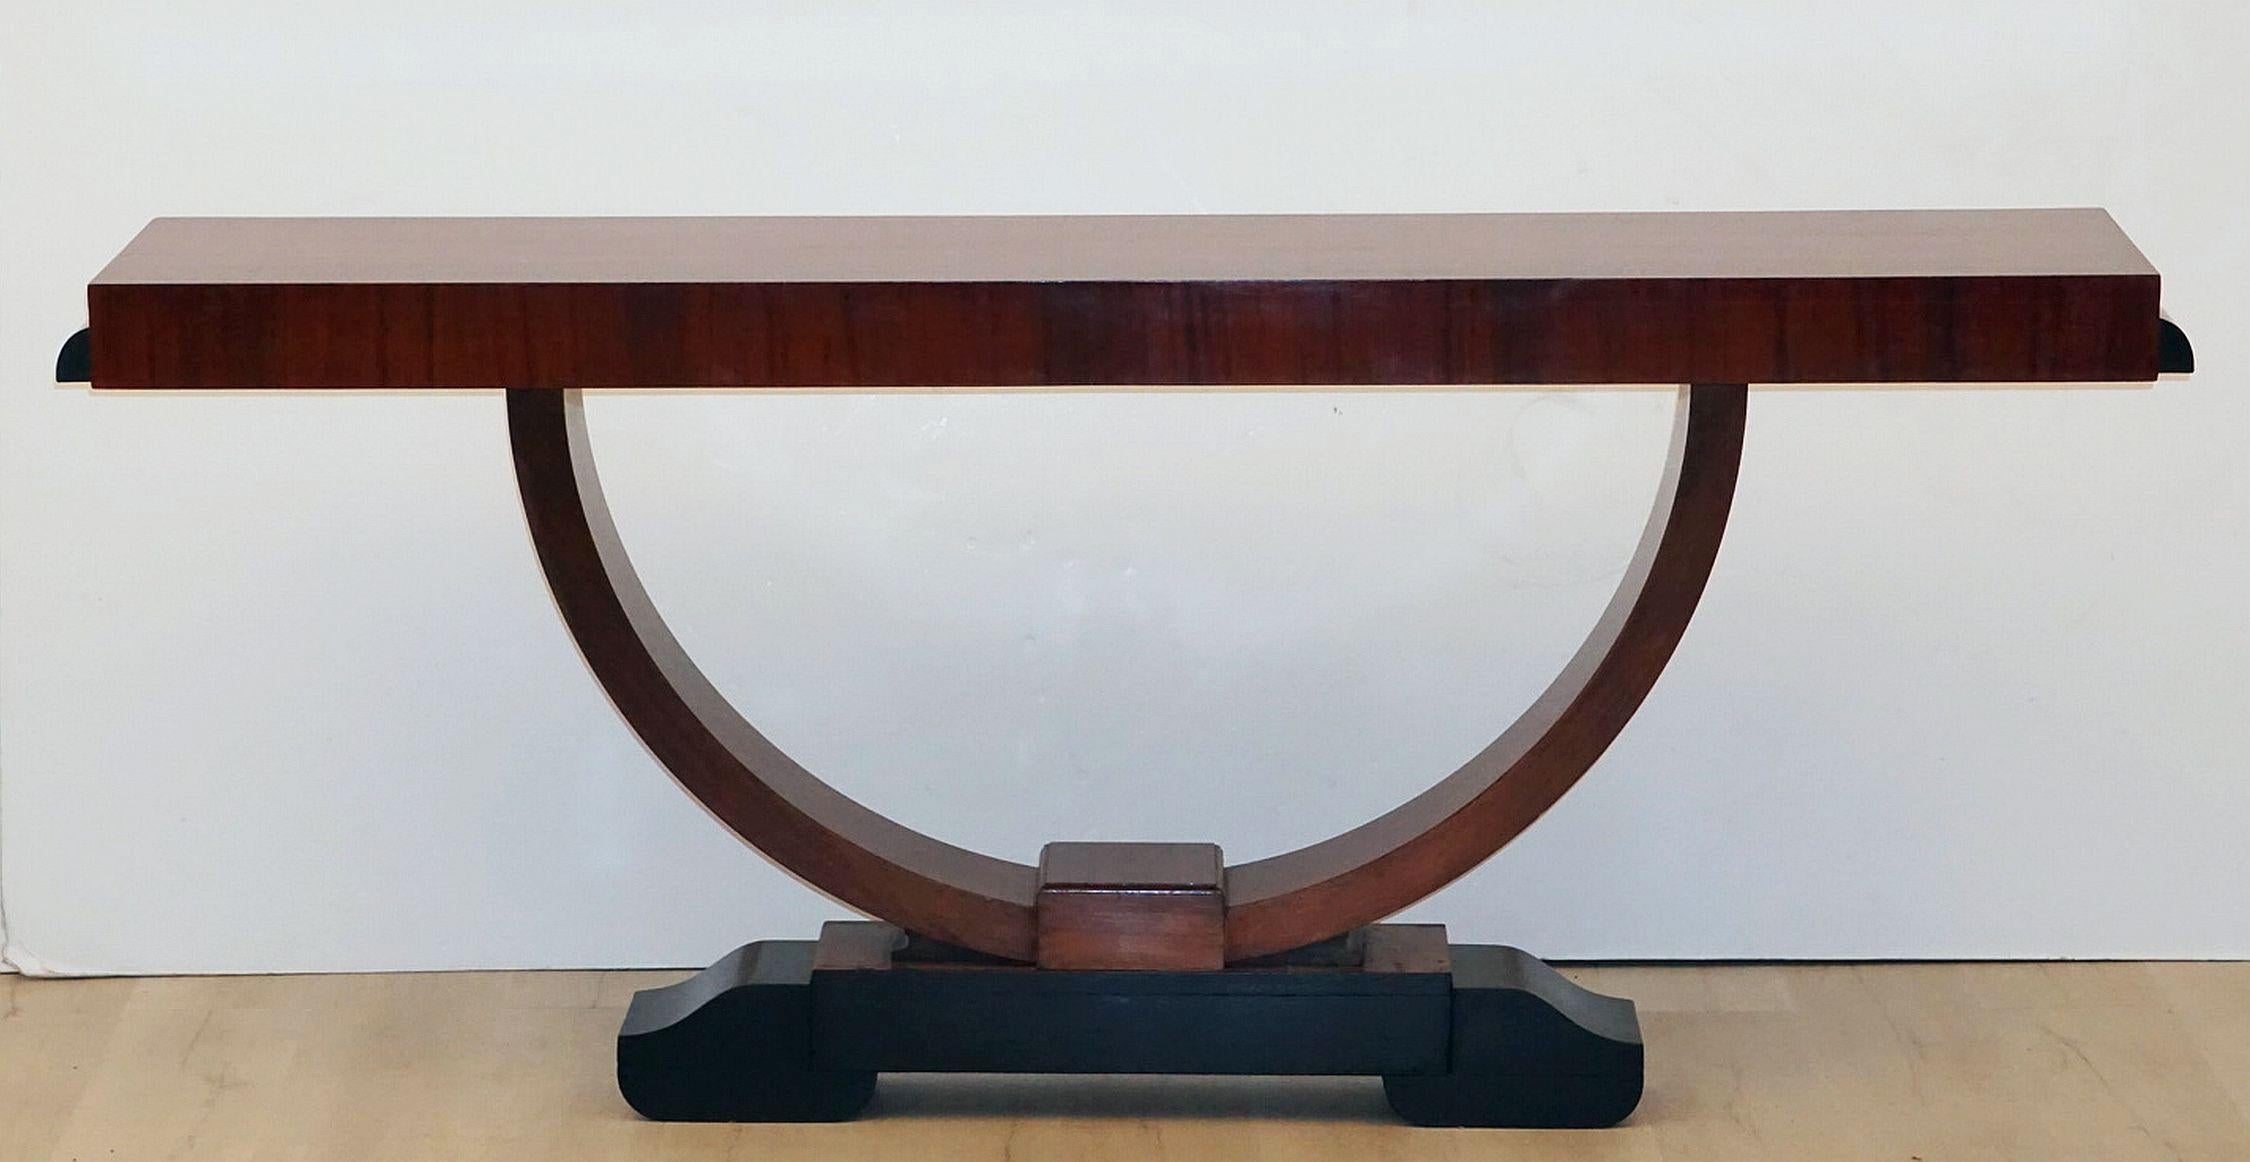 A fine English console table in the Art Deco style, featuring a rectangular top of mahogany set upon a half ring support, mounted to a shaped raised base of ebonized wood.

